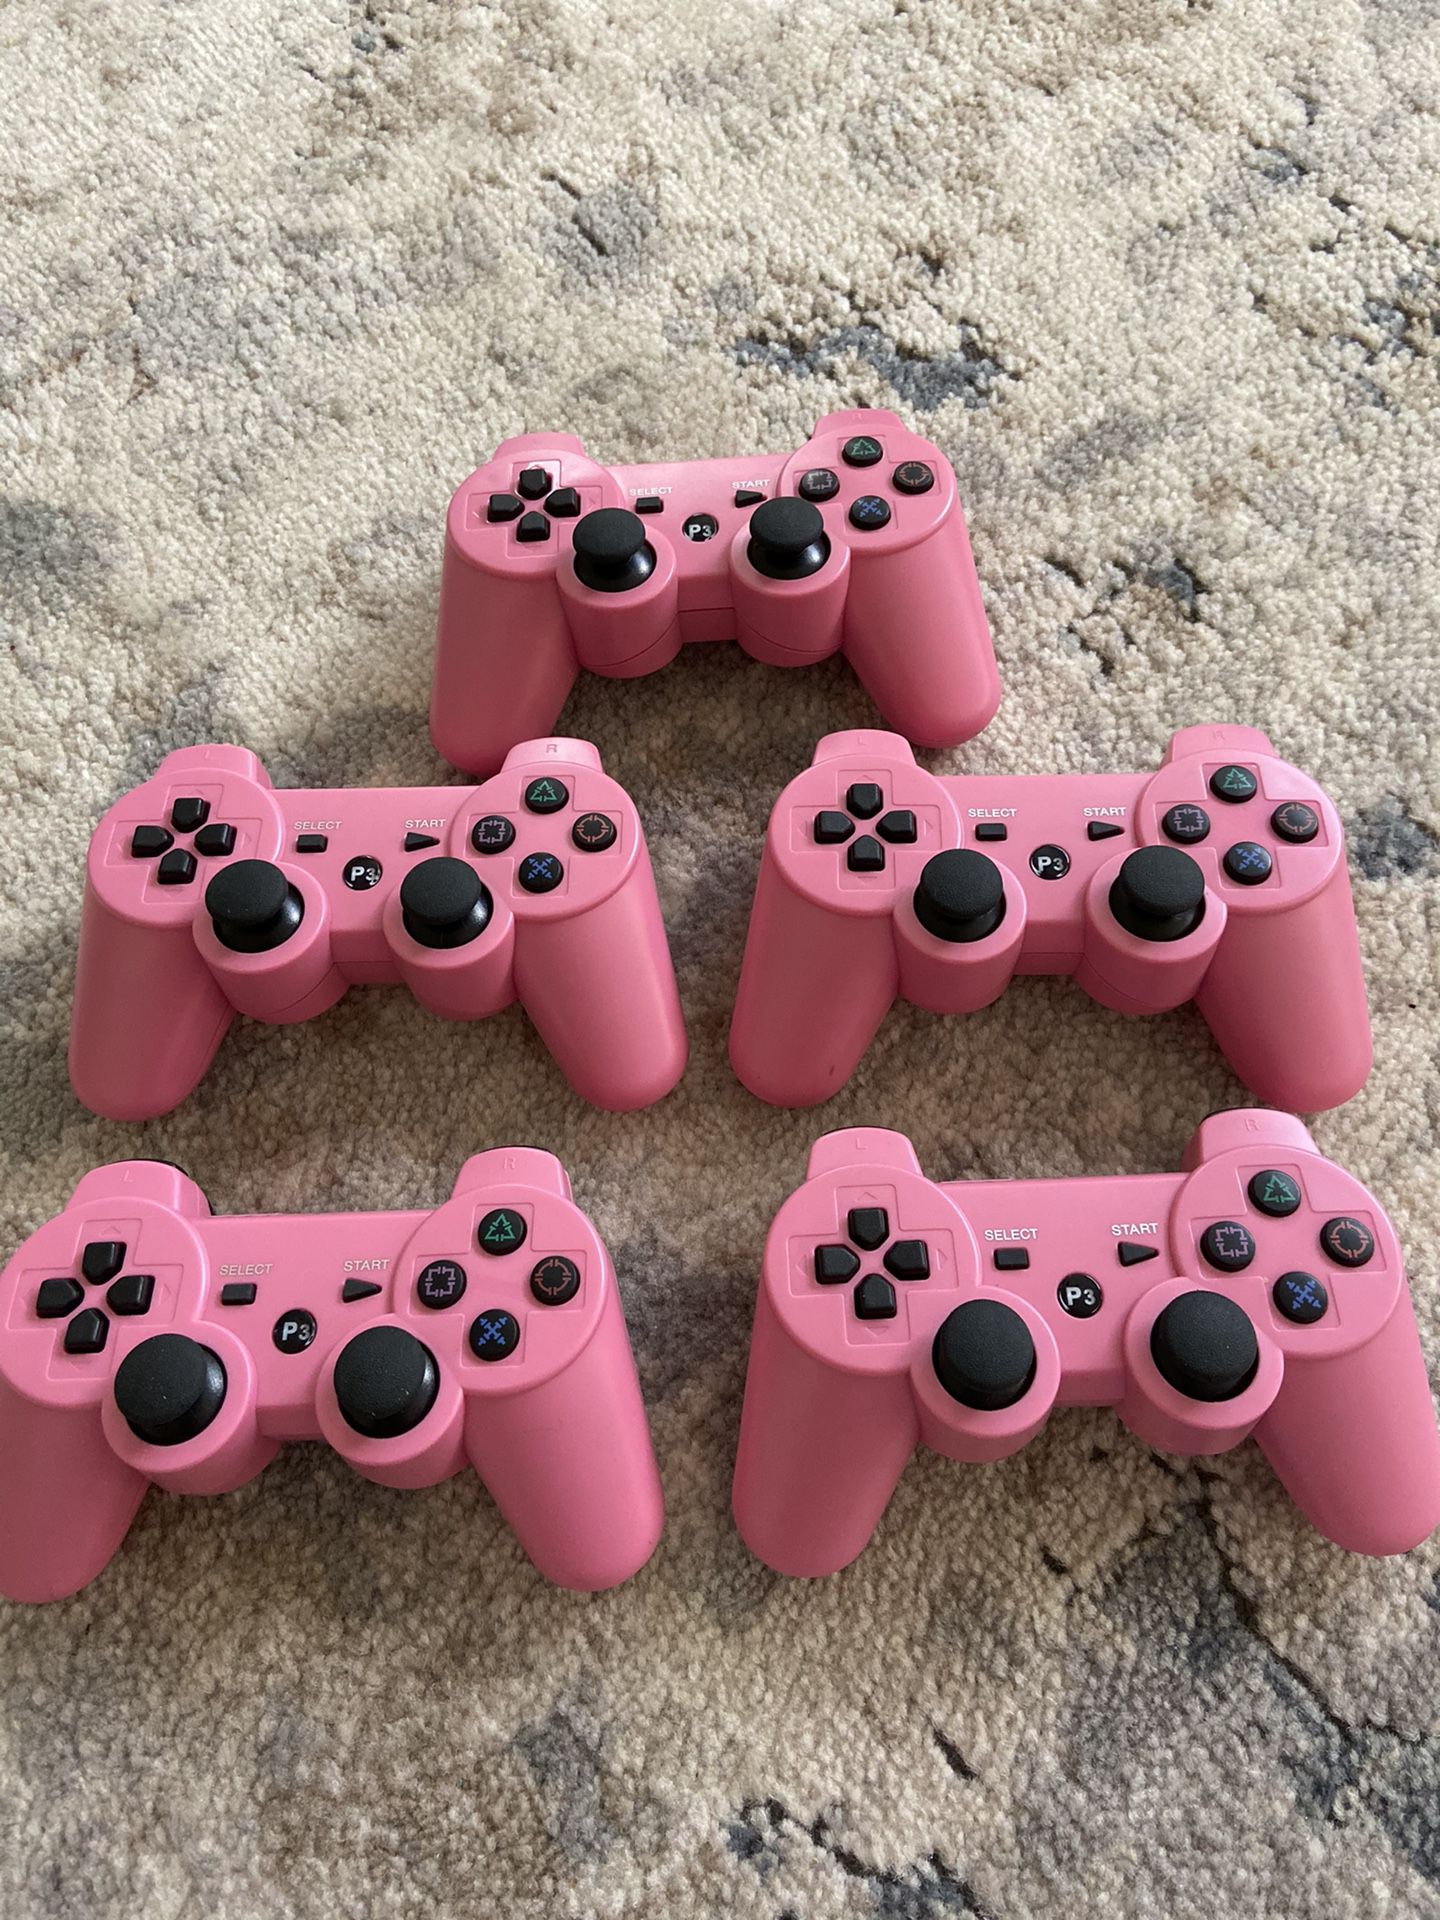 ps3 controller 5 count